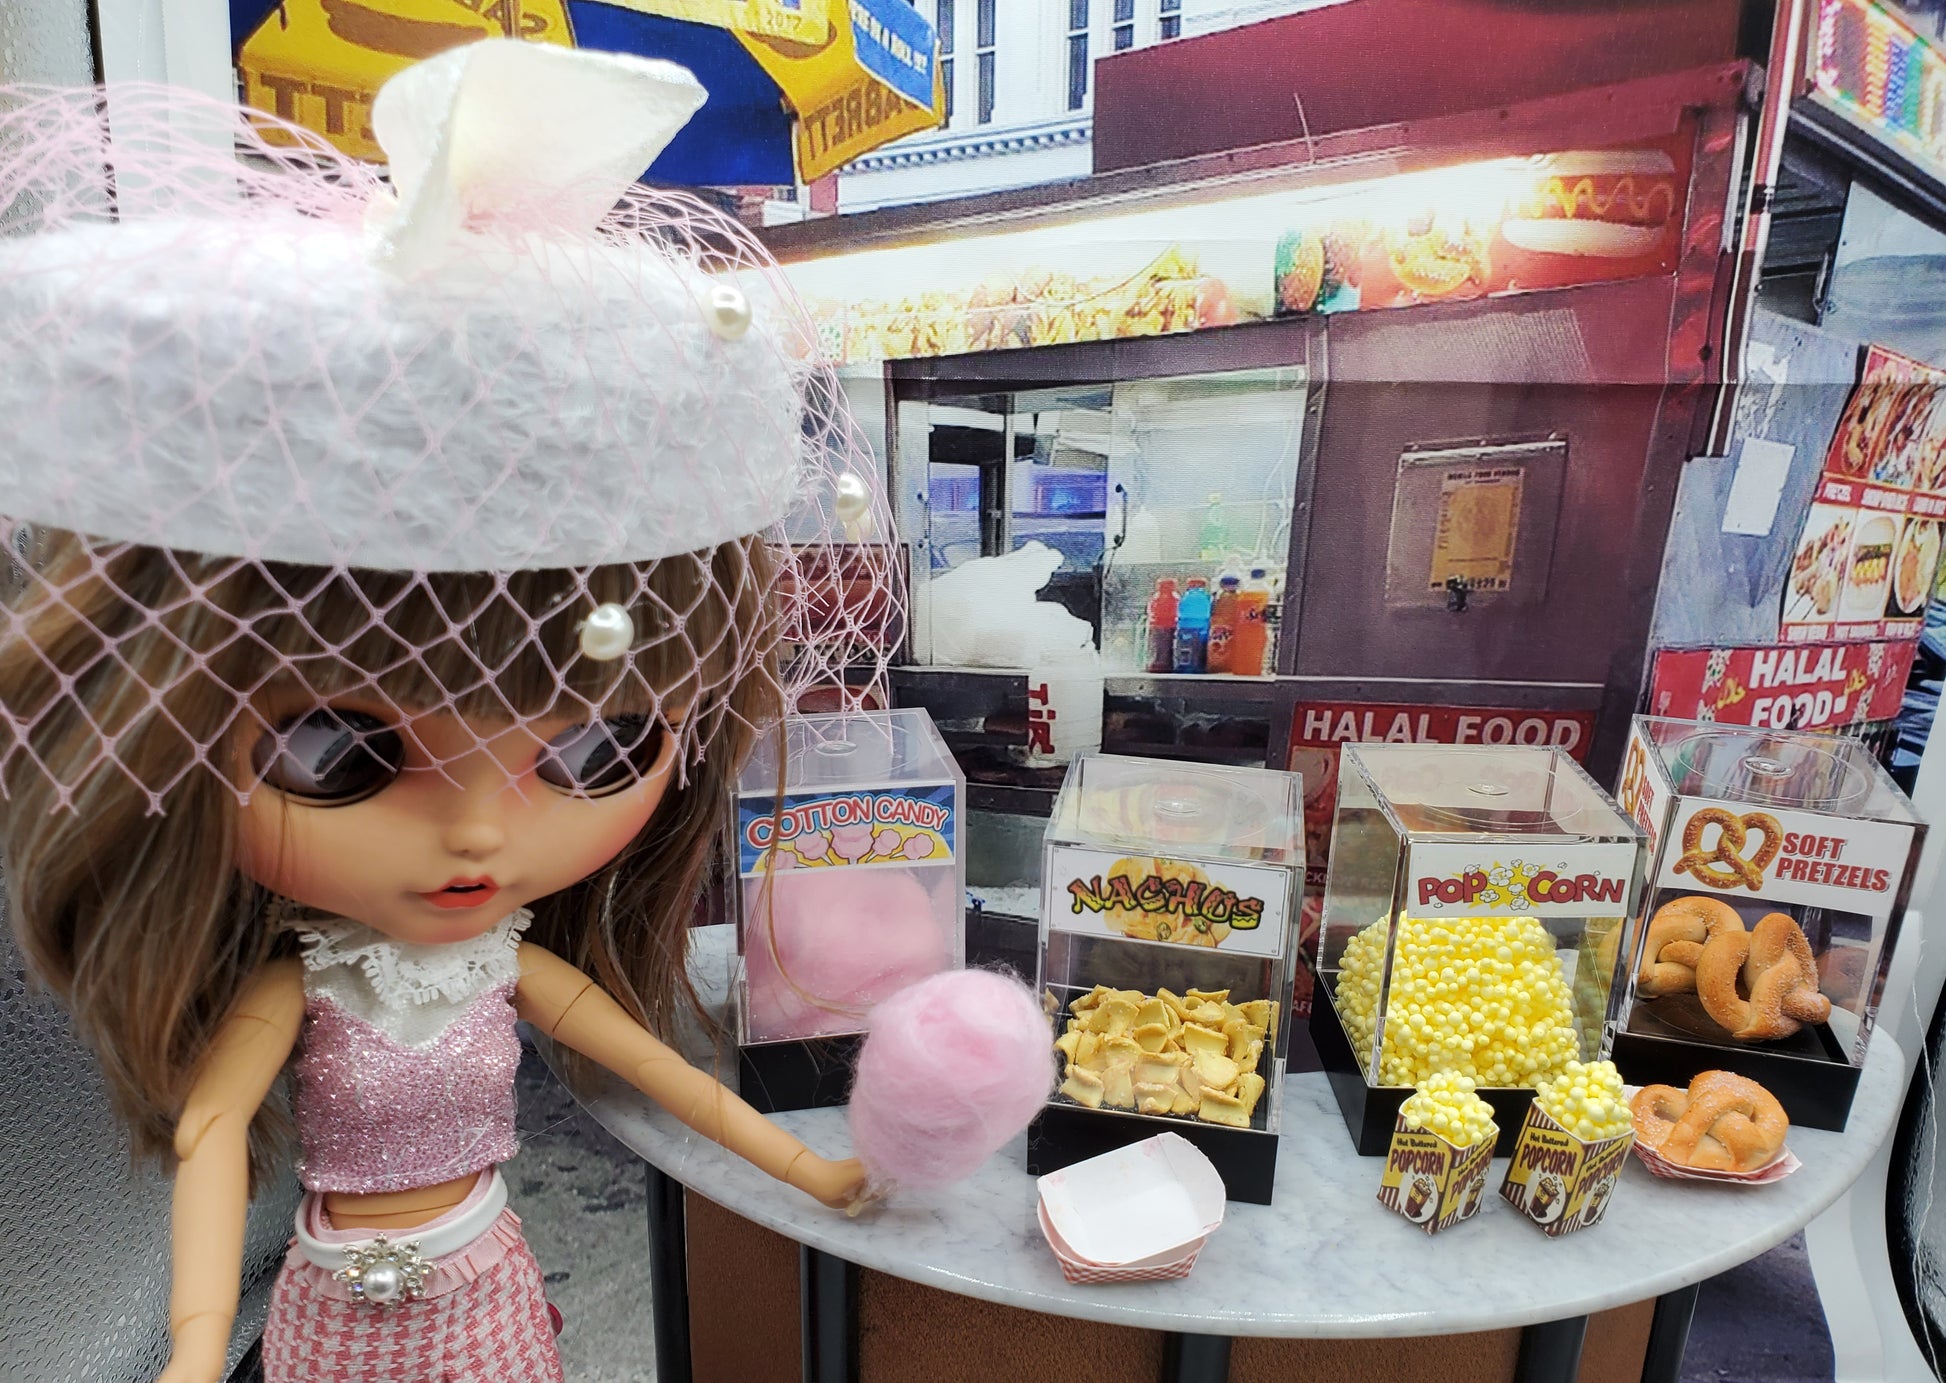 Blythe doll with Concession stand